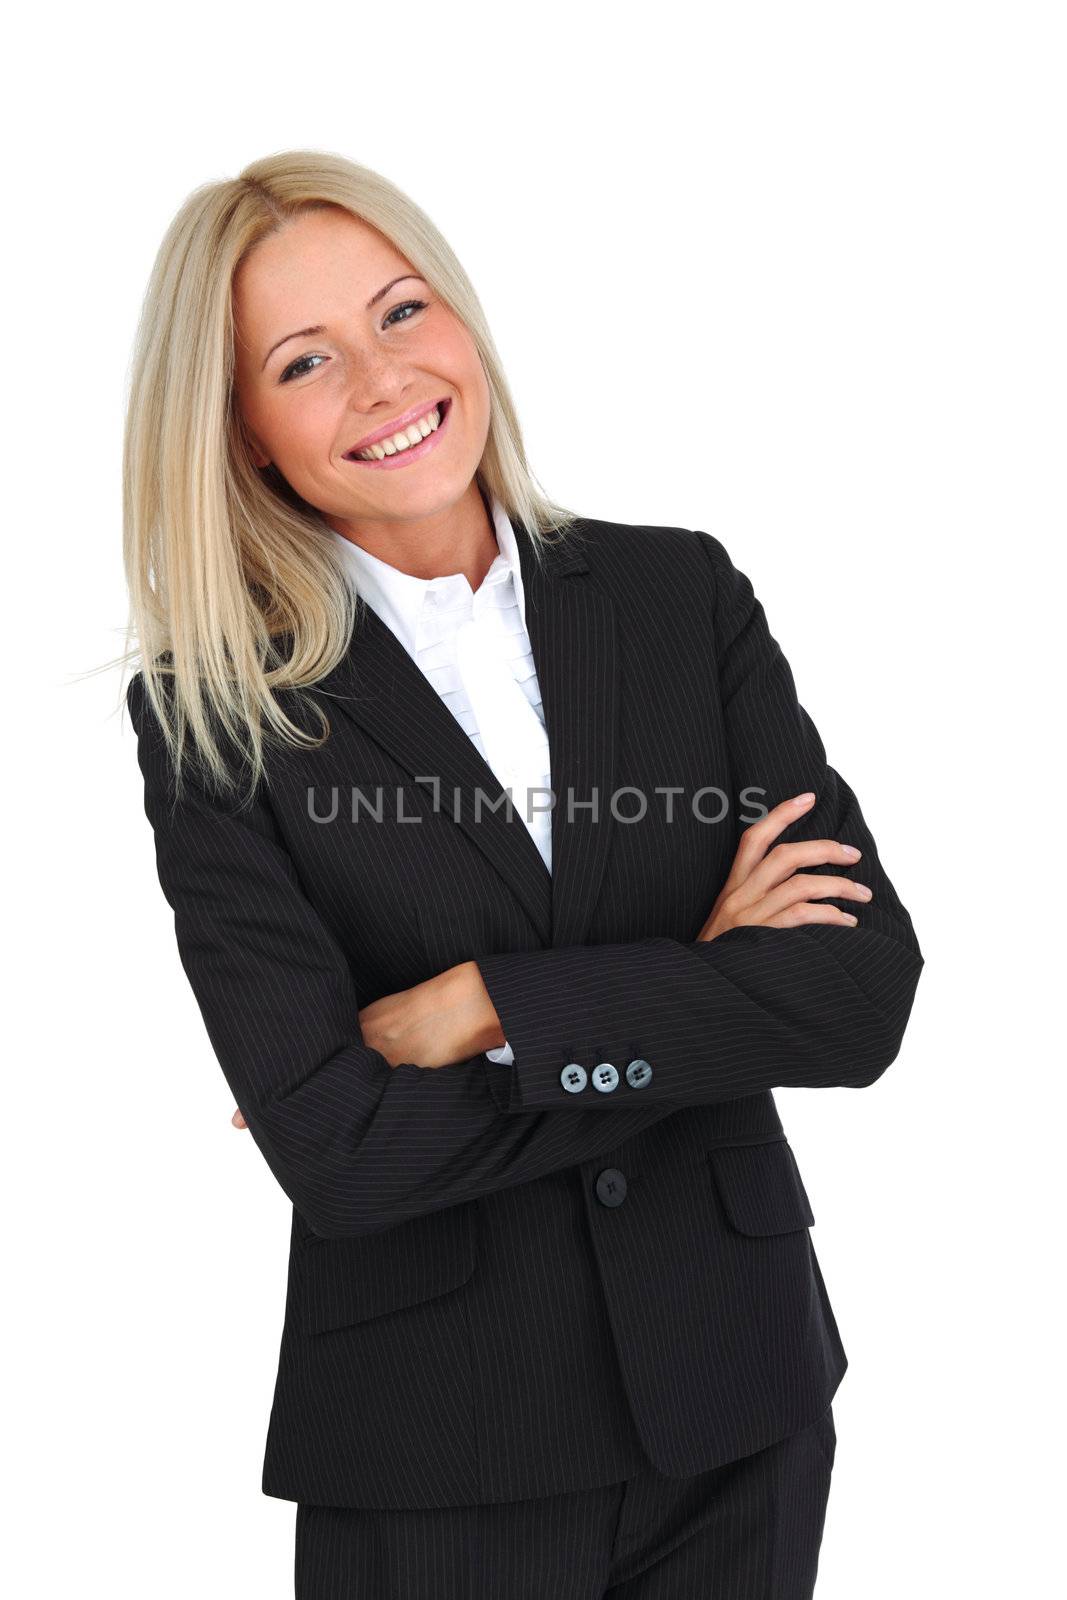 business woman portrait isolated close up